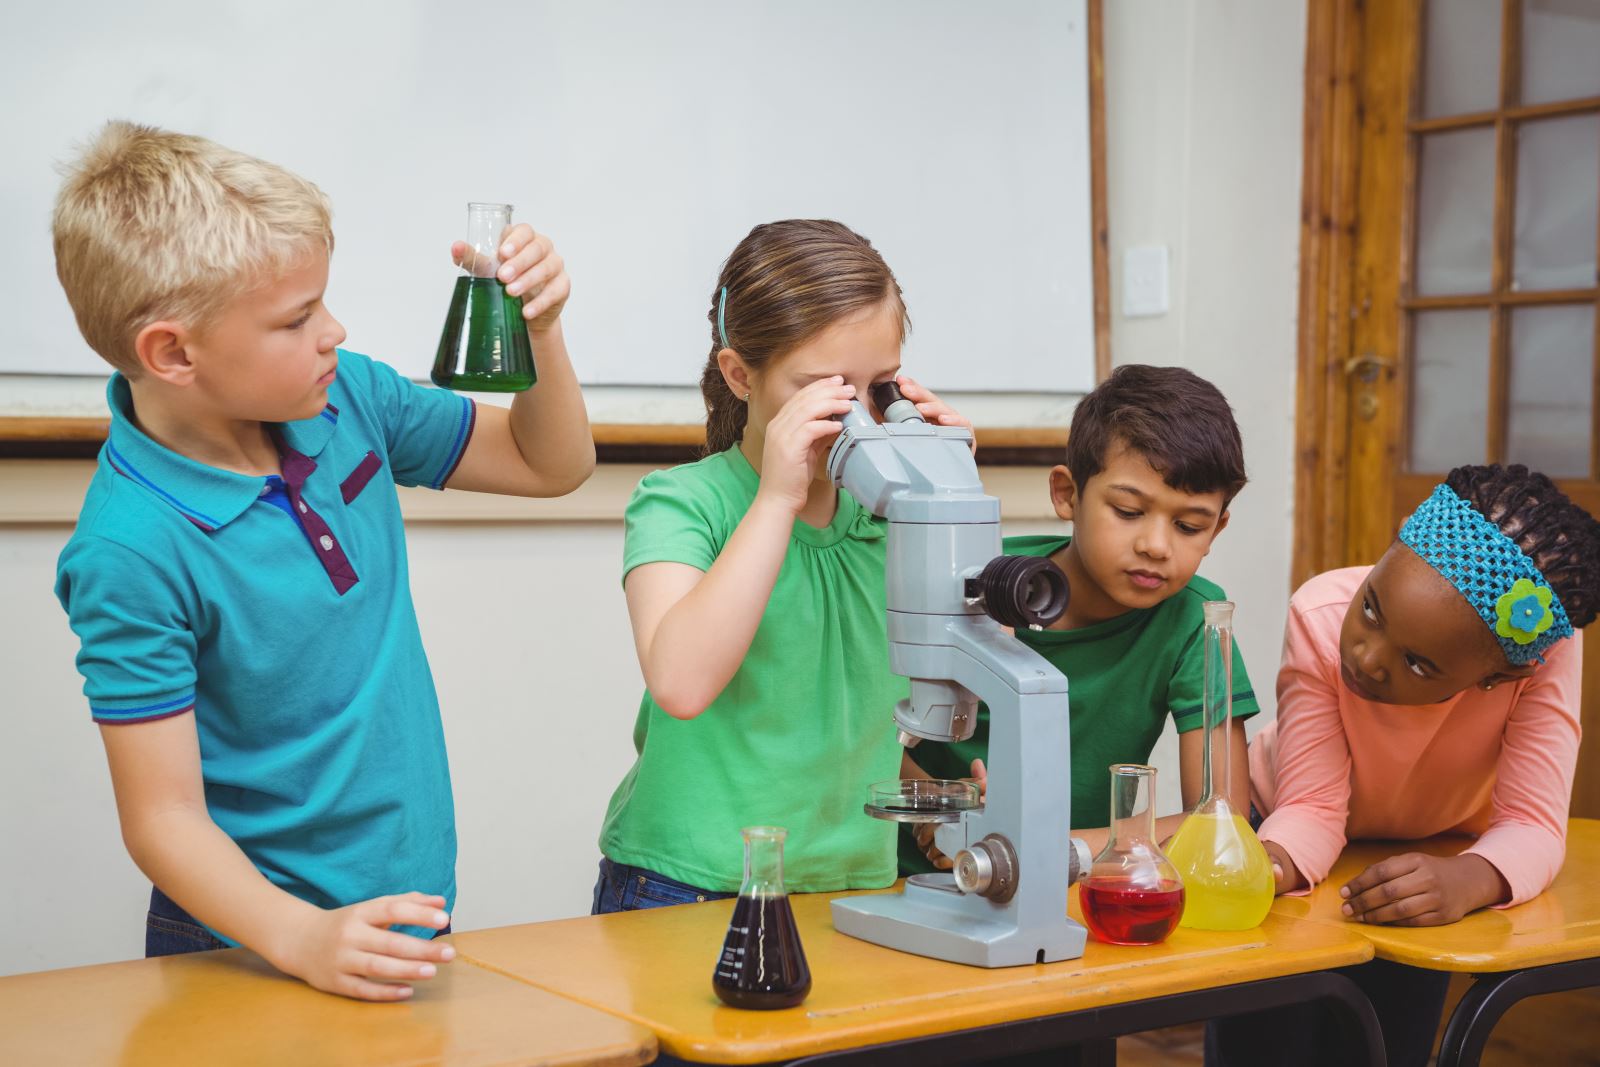 4 children explore science using a microscope and glass containers with various colored liquids